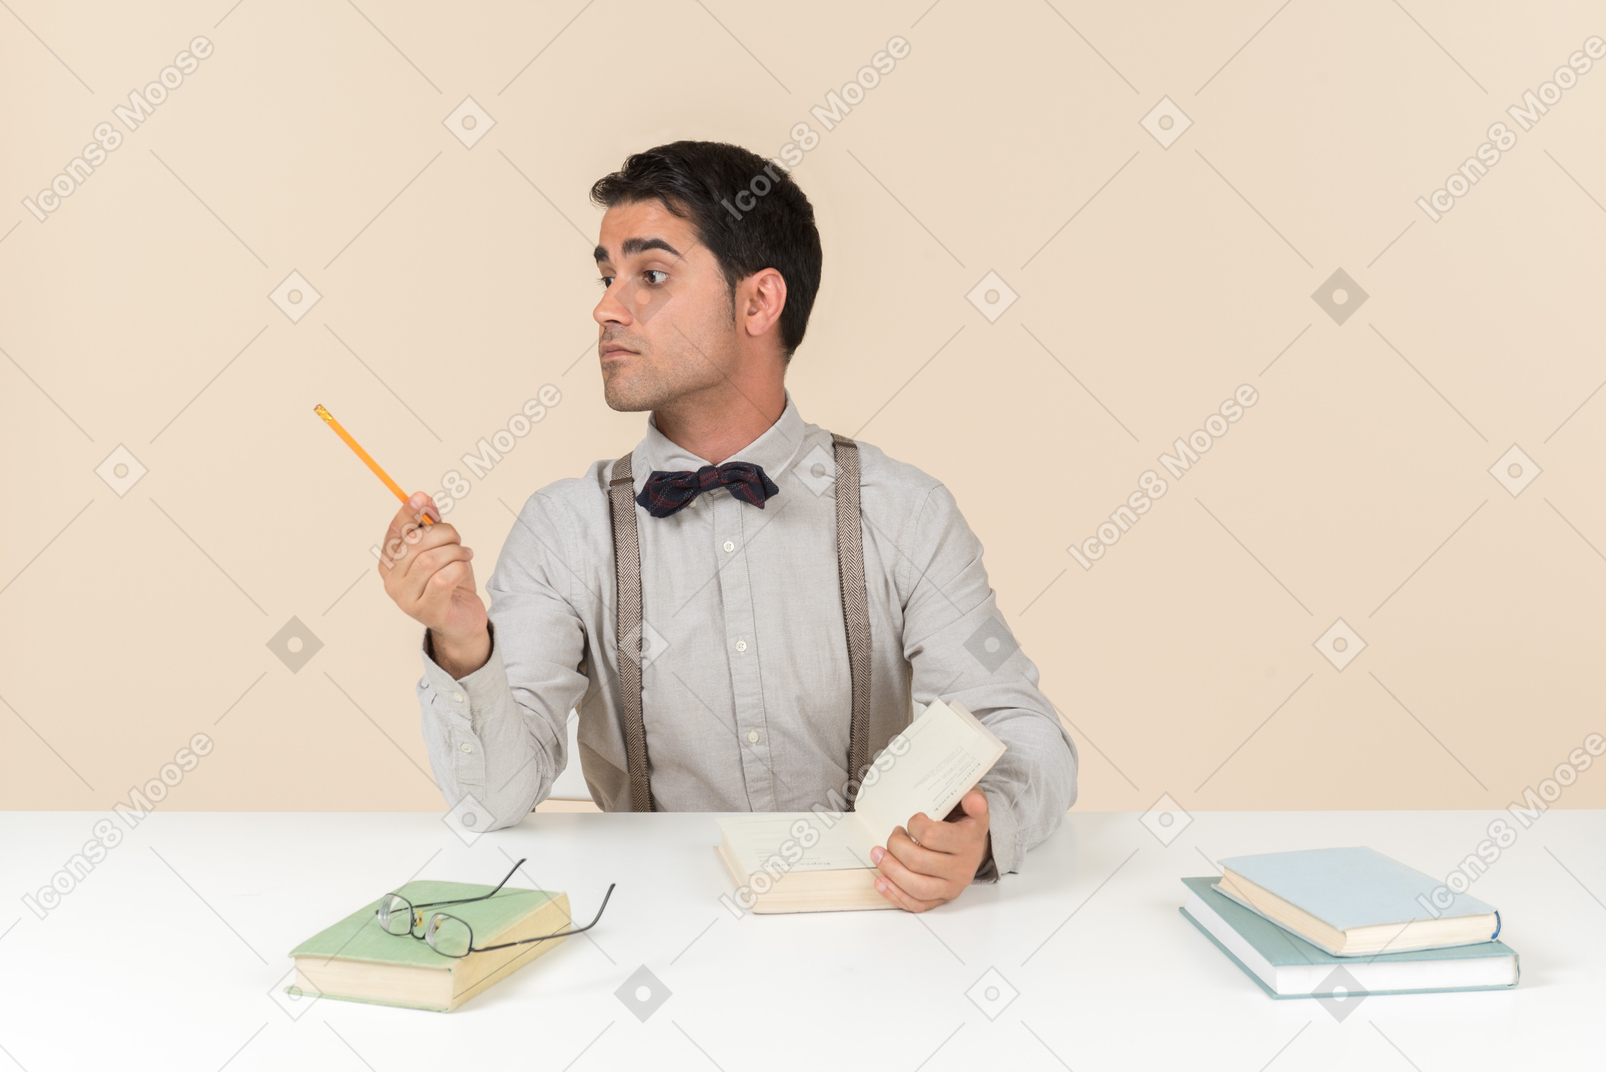 Adult student sitting at the table and pointing aside with a pen